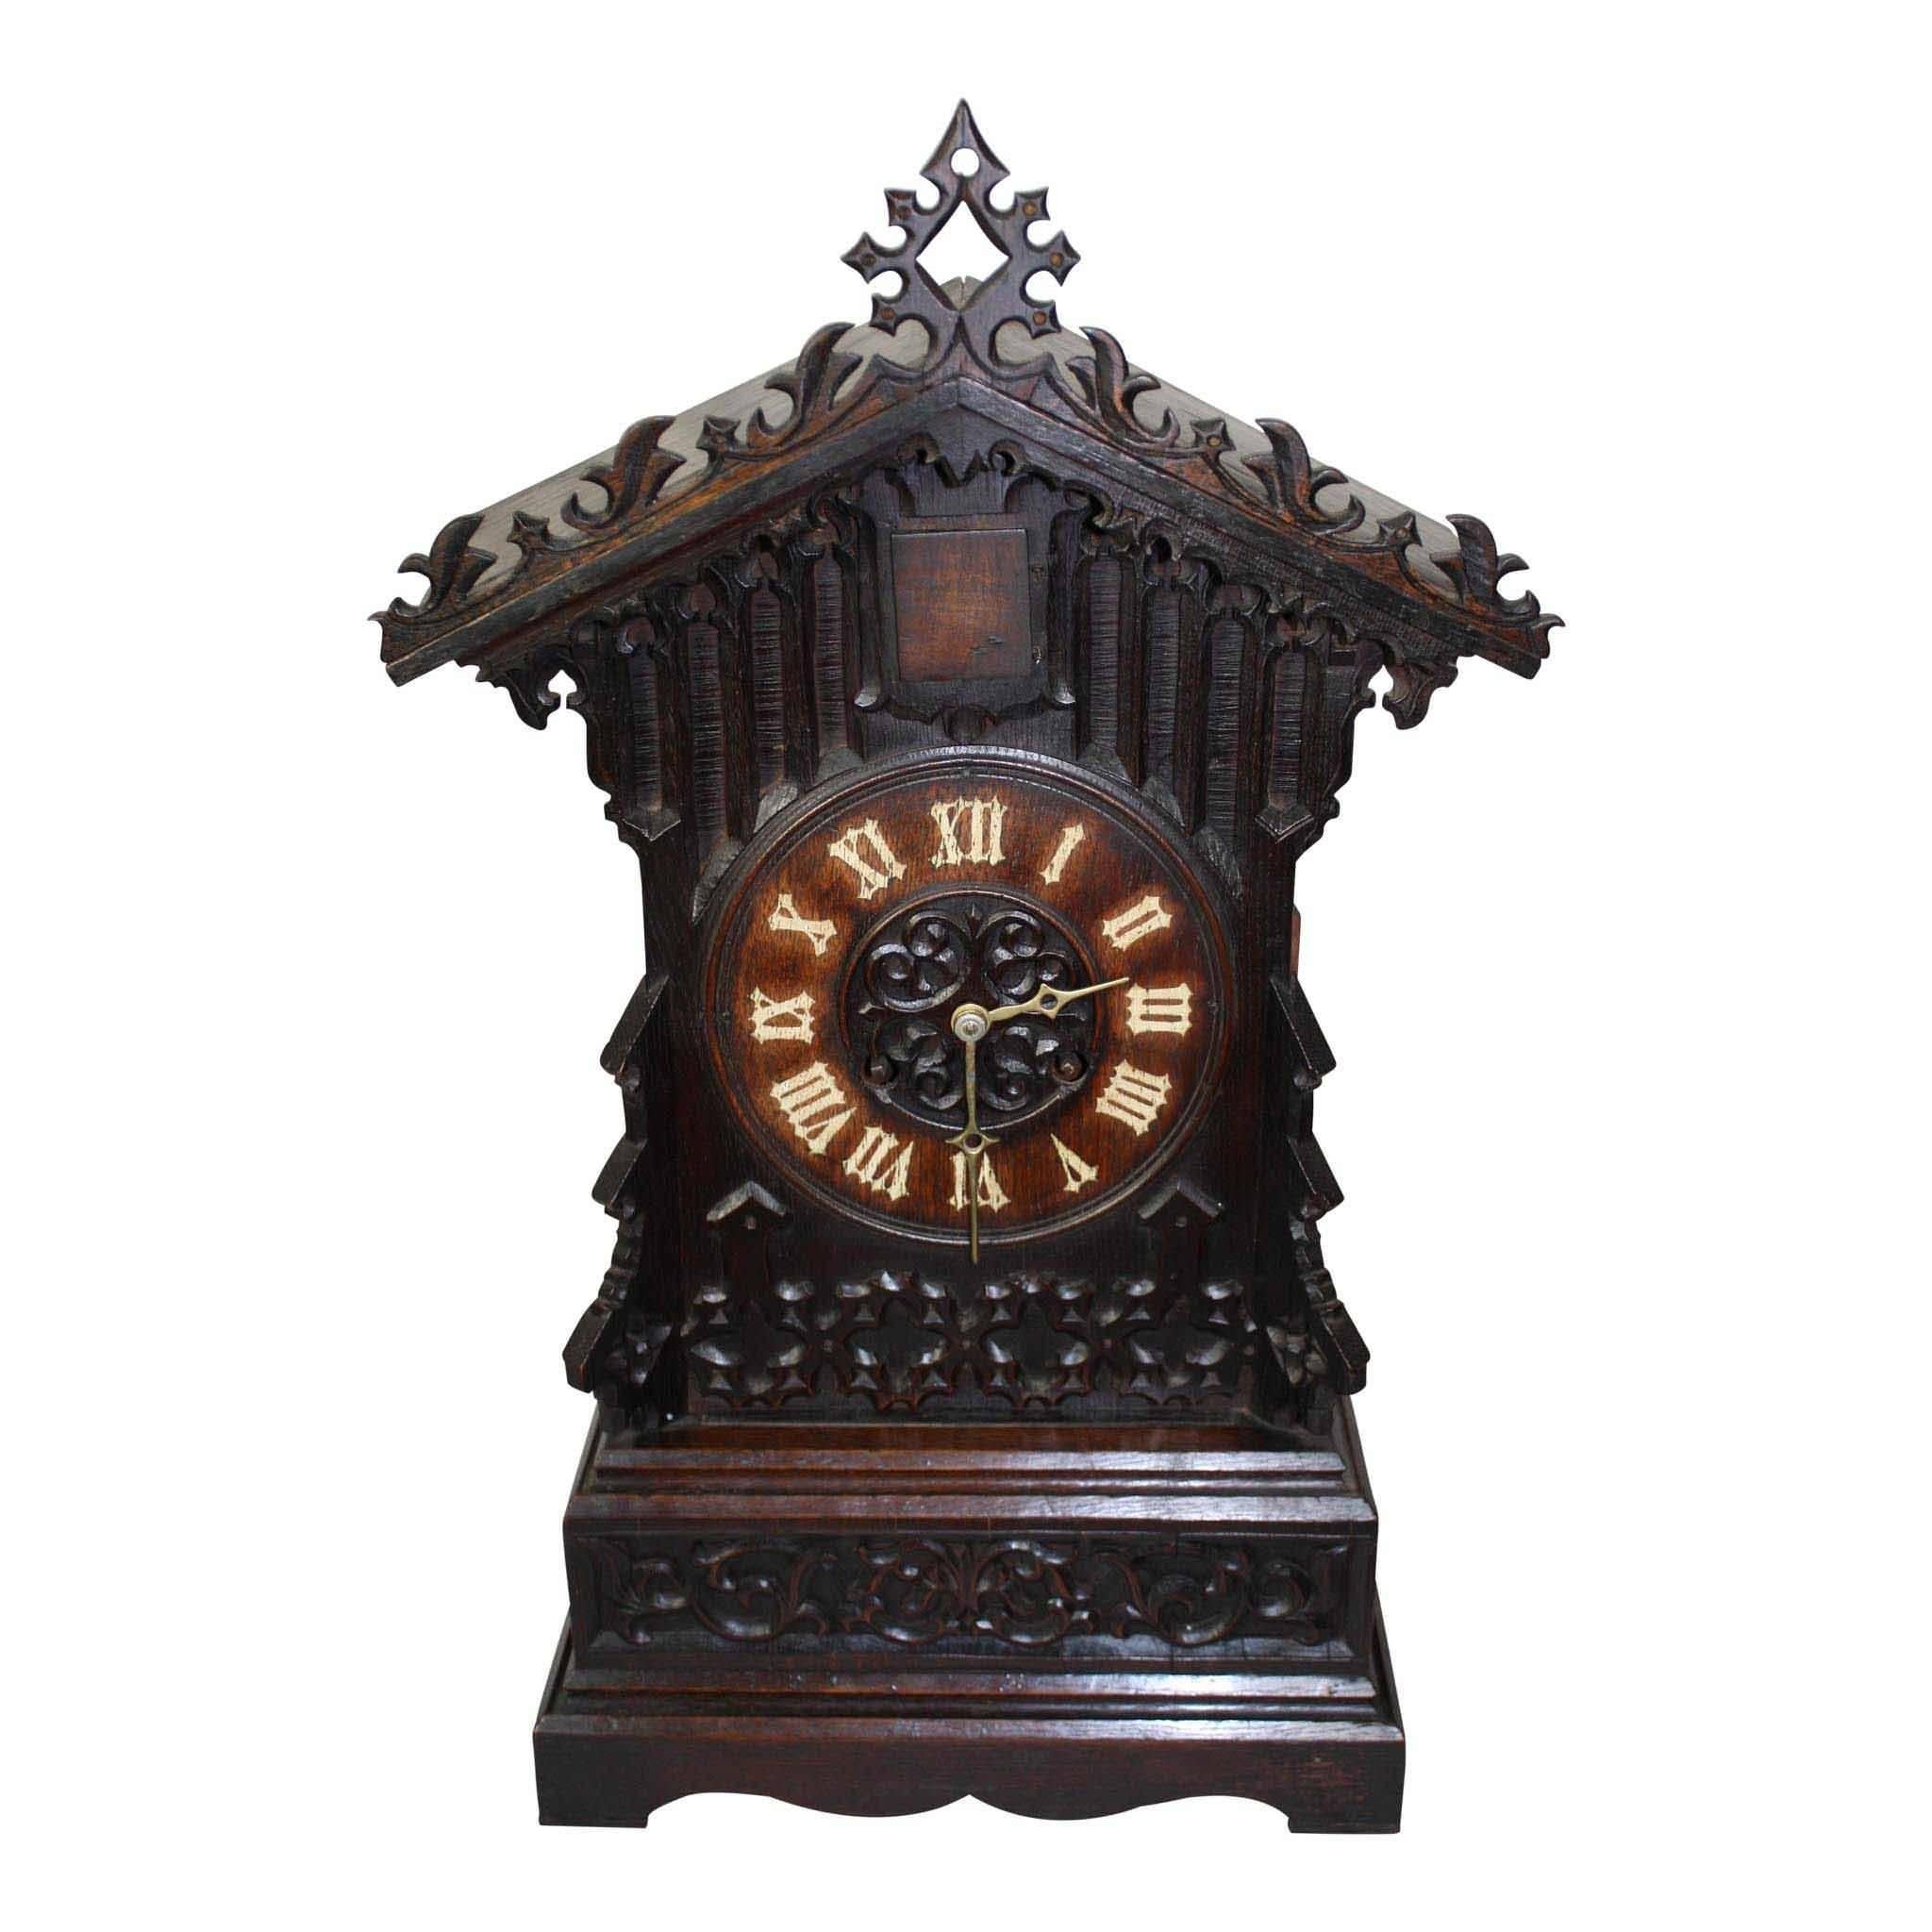 A beautifully carved, wall-mounted shelf, holds this German Cuckoo clock. Carved vines, leaves and star patterns are applied to a simple and elegant case. Delicate brass hands with painted numerals on a 7.5 inch clock face. Working order. Key